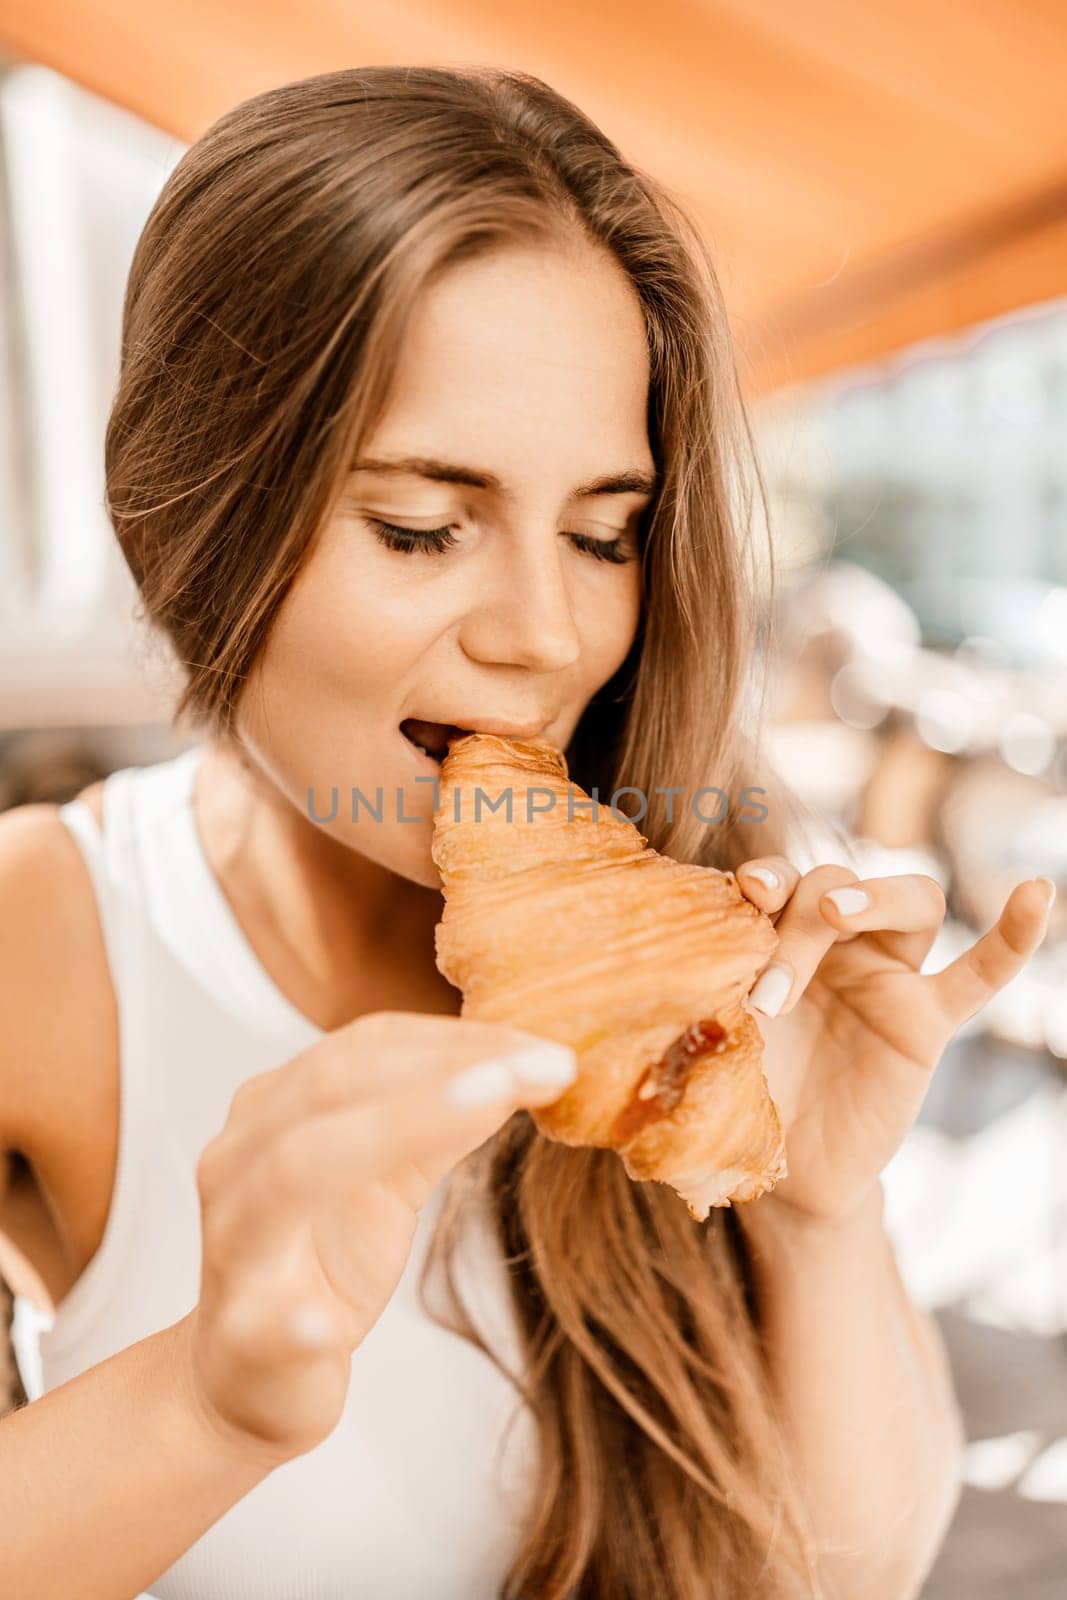 A woman is eating a croissant. The croissant is half eaten and has a jelly filling. by Matiunina